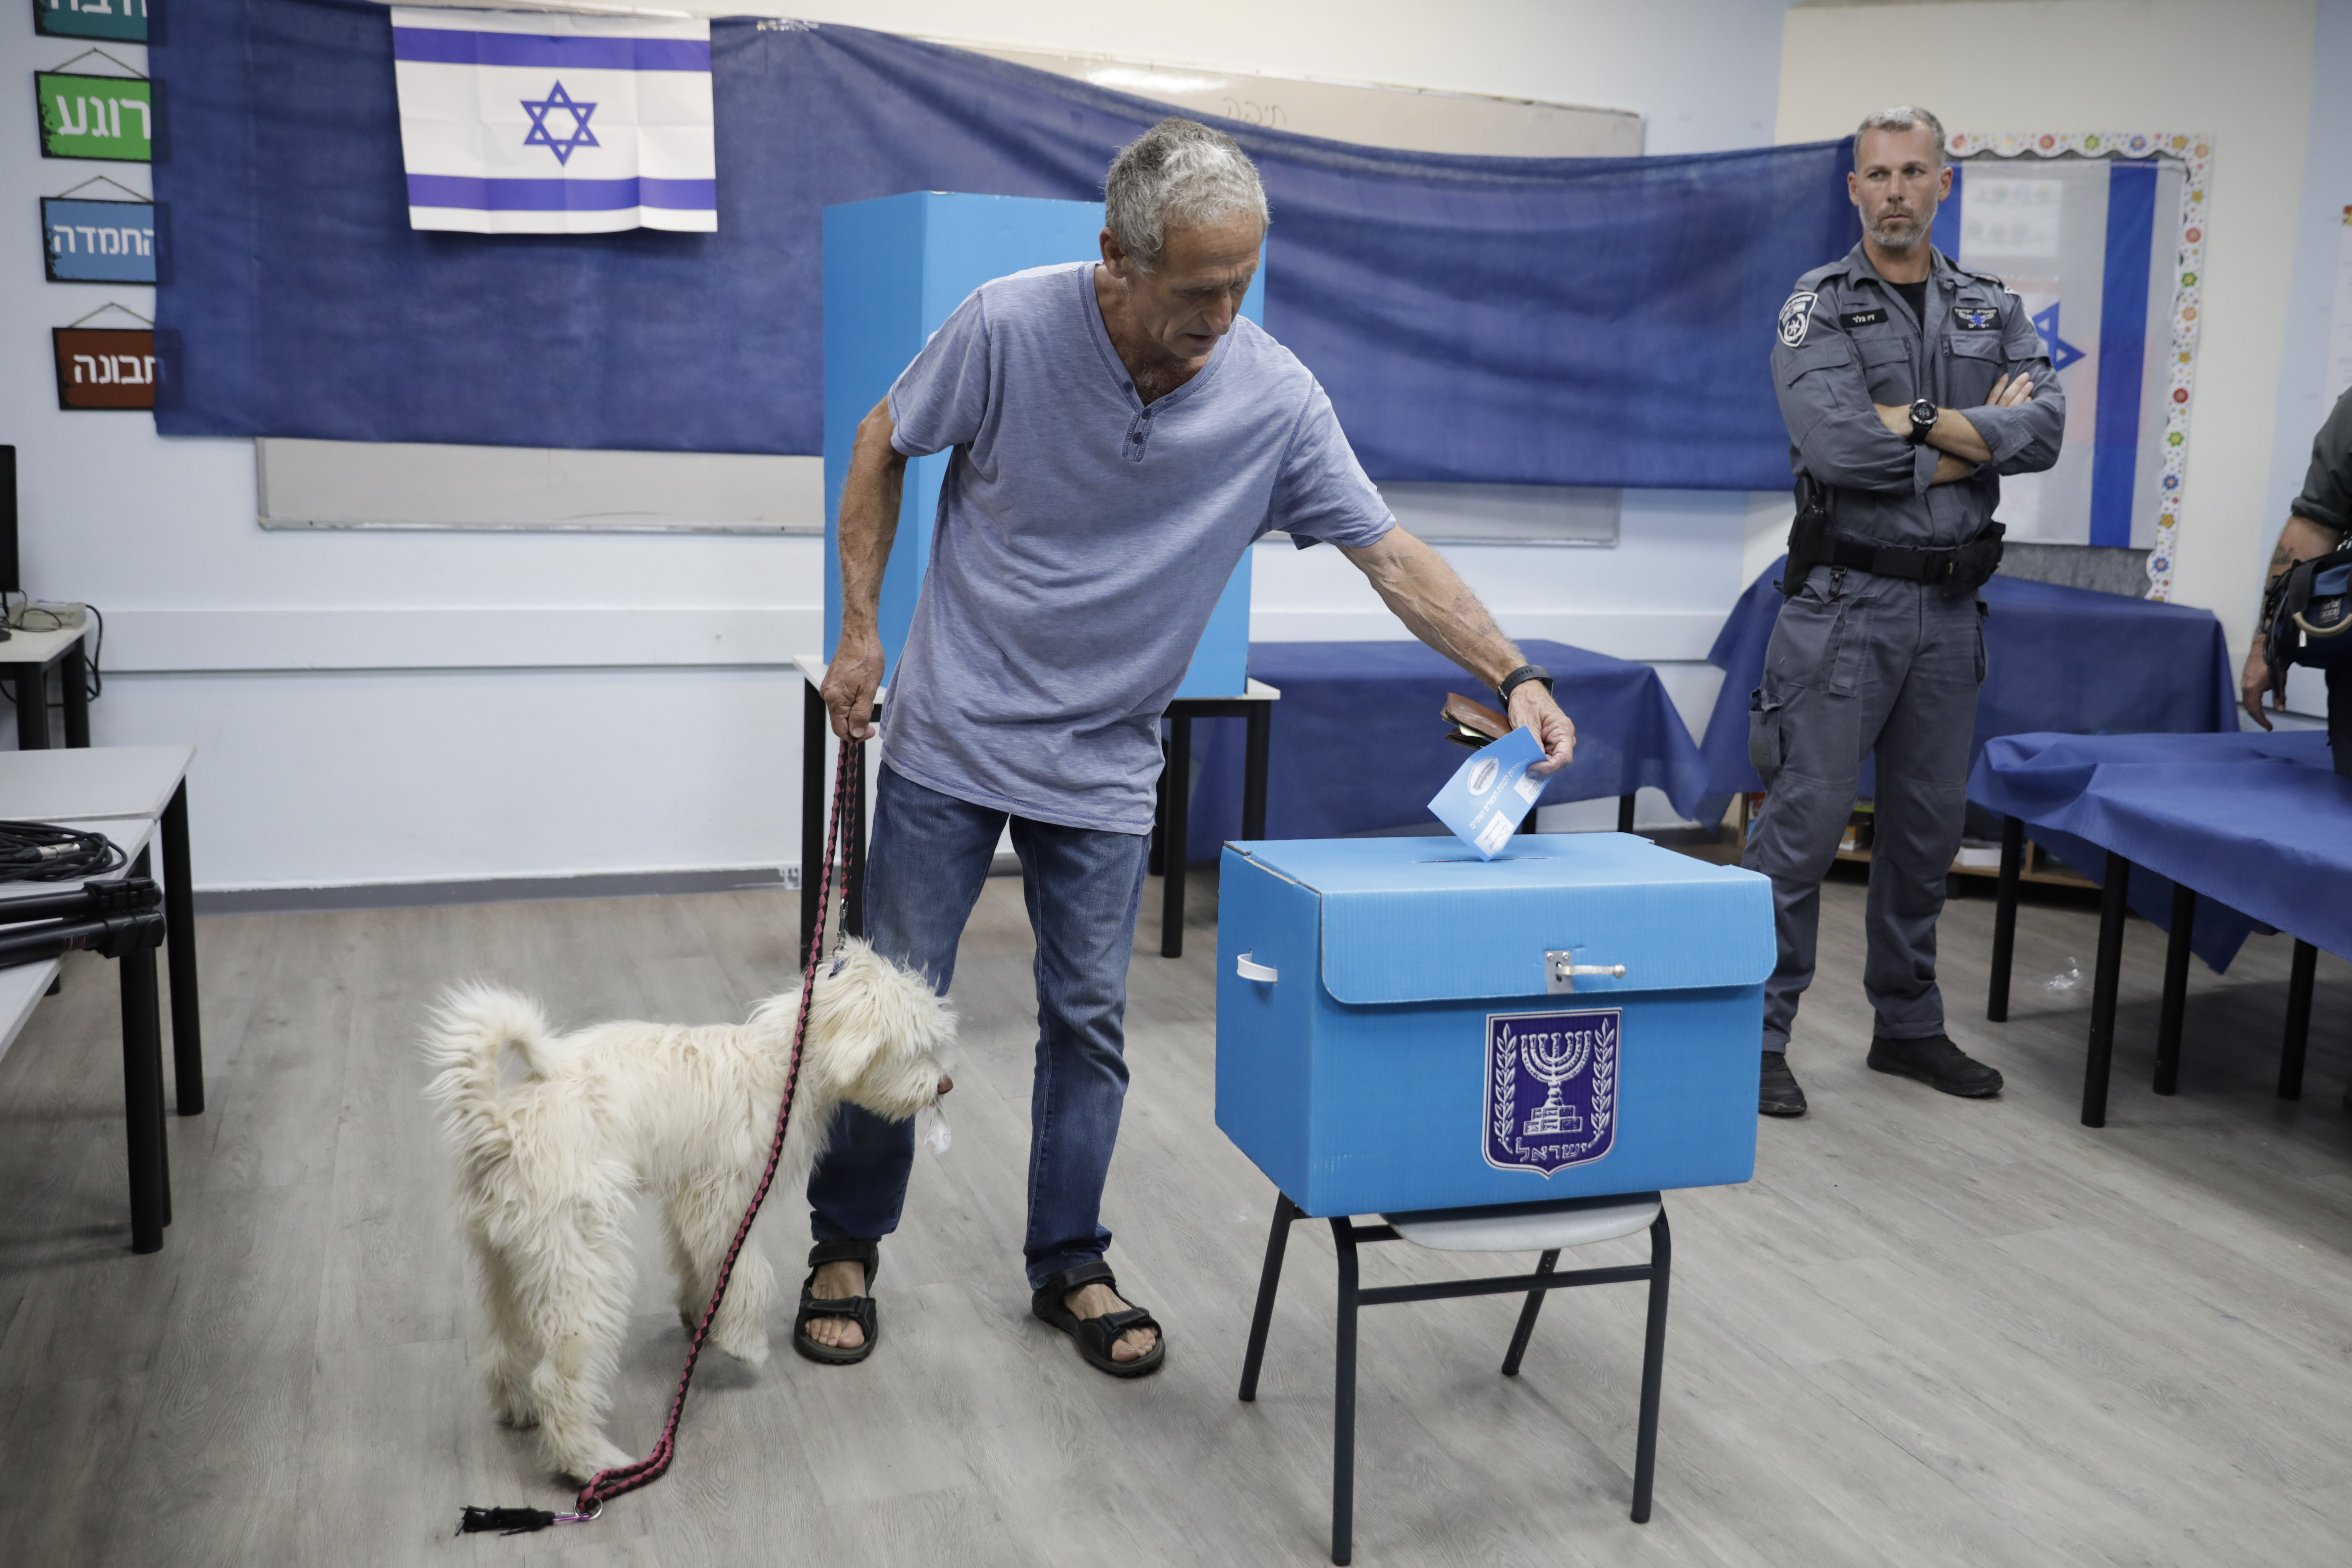 A man votes at a poling station in Rosh Haayin, Israel, Tuesday, Sept. 17, 2019. Israelis began voting Tuesday in an unprecedented repeat election that will decide whether longtime Prime Minister Benjamin Netanyahu stays in power despite a looming indictment on corruption charges. (AP Photo/Sebastian Scheiner)